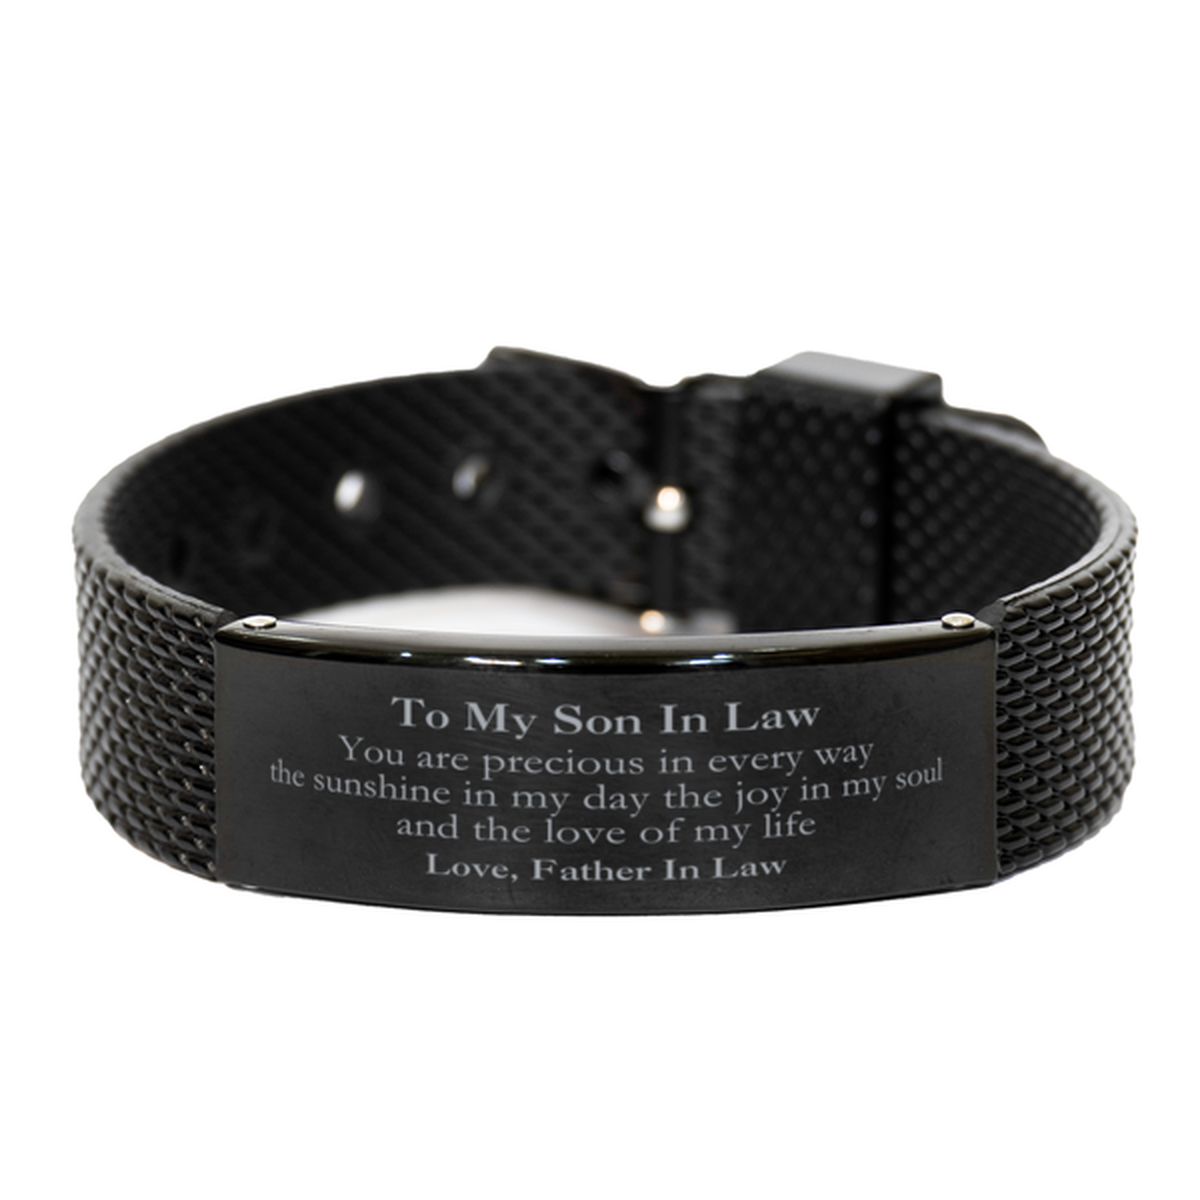 Graduation Gifts for Son In Law Black Shark Mesh Bracelet Present from Father In Law, Christmas Son In Law Birthday Gifts Son In Law You are precious in every way the sunshine in my day. Love, Father In Law